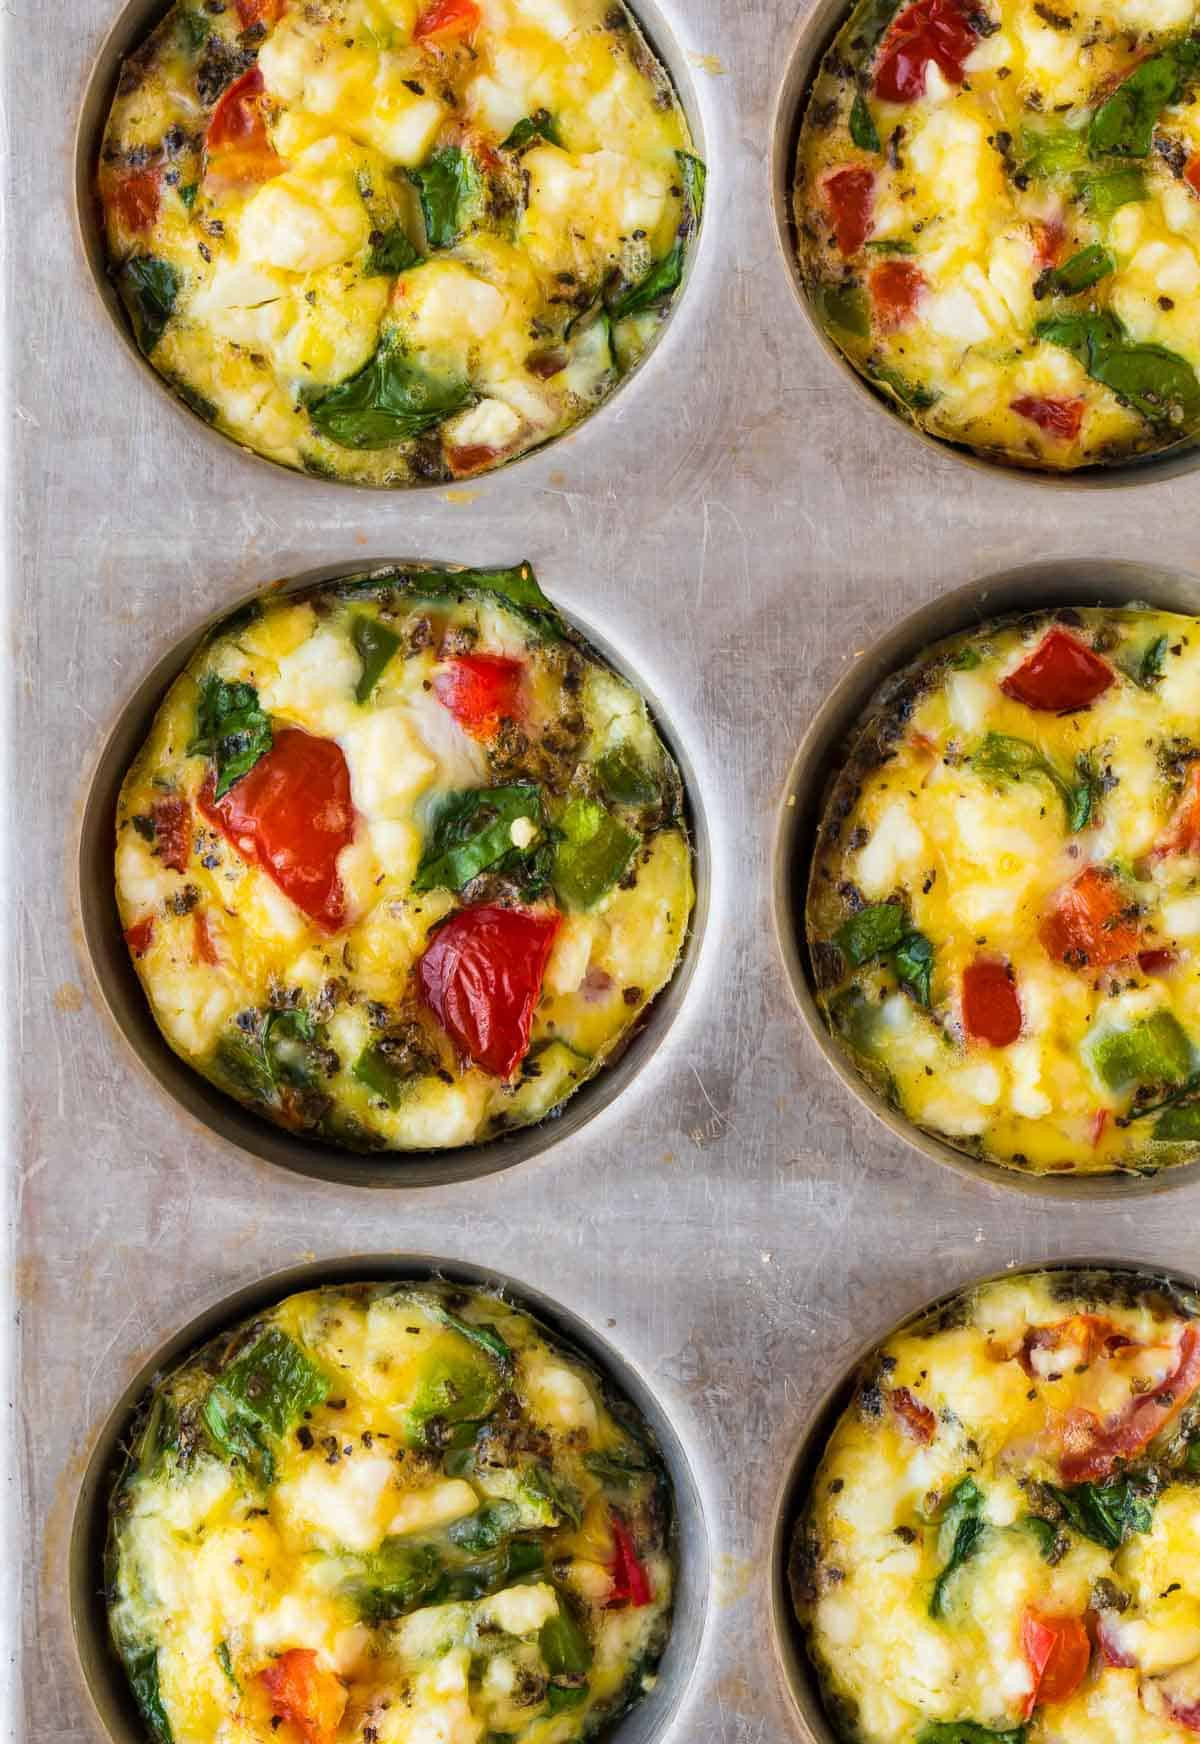 Healthy Breakfast Recipes With Eggs
 Healthy Breakfast Egg Muffins